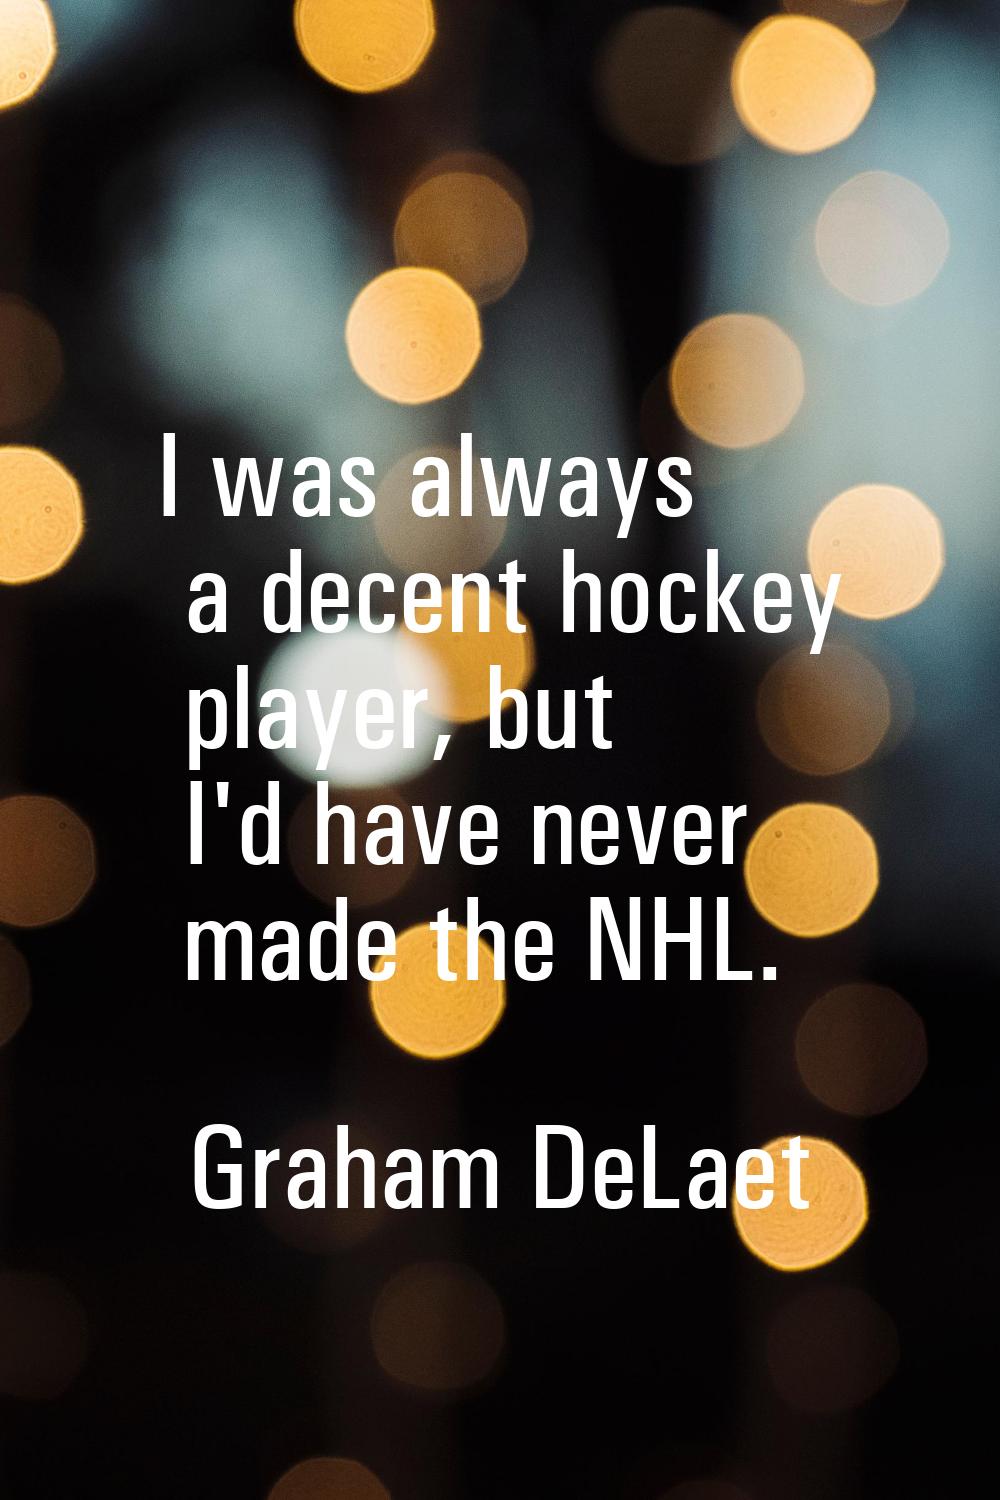 I was always a decent hockey player, but I'd have never made the NHL.